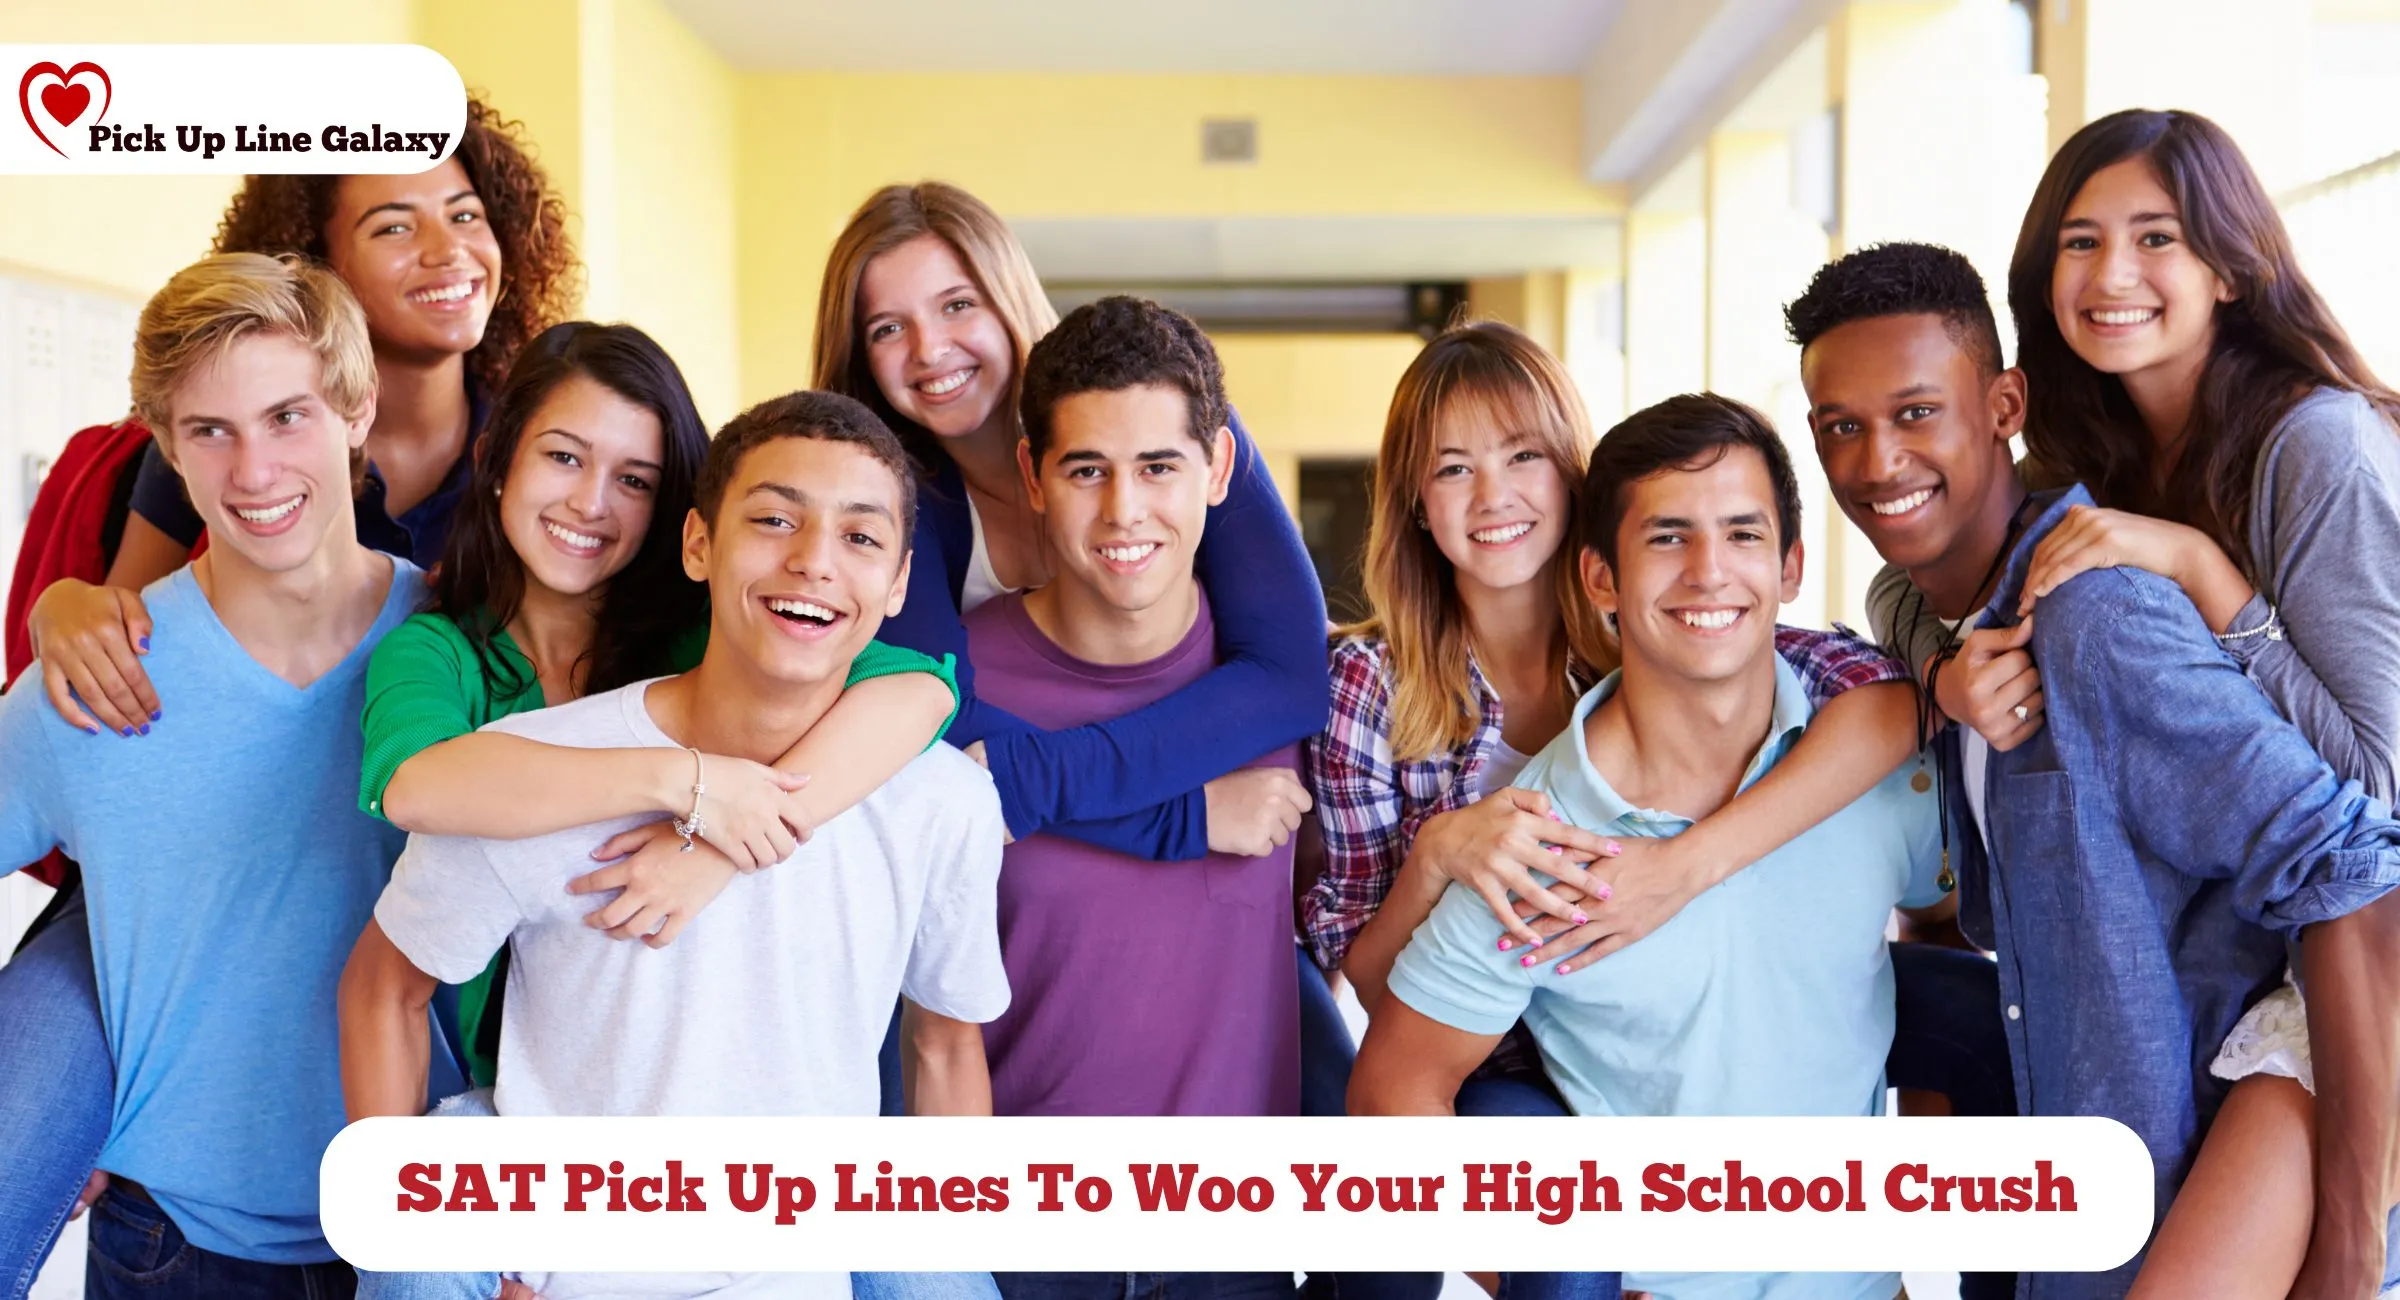 SAT Pick Up Lines To Woo Your High School Crush